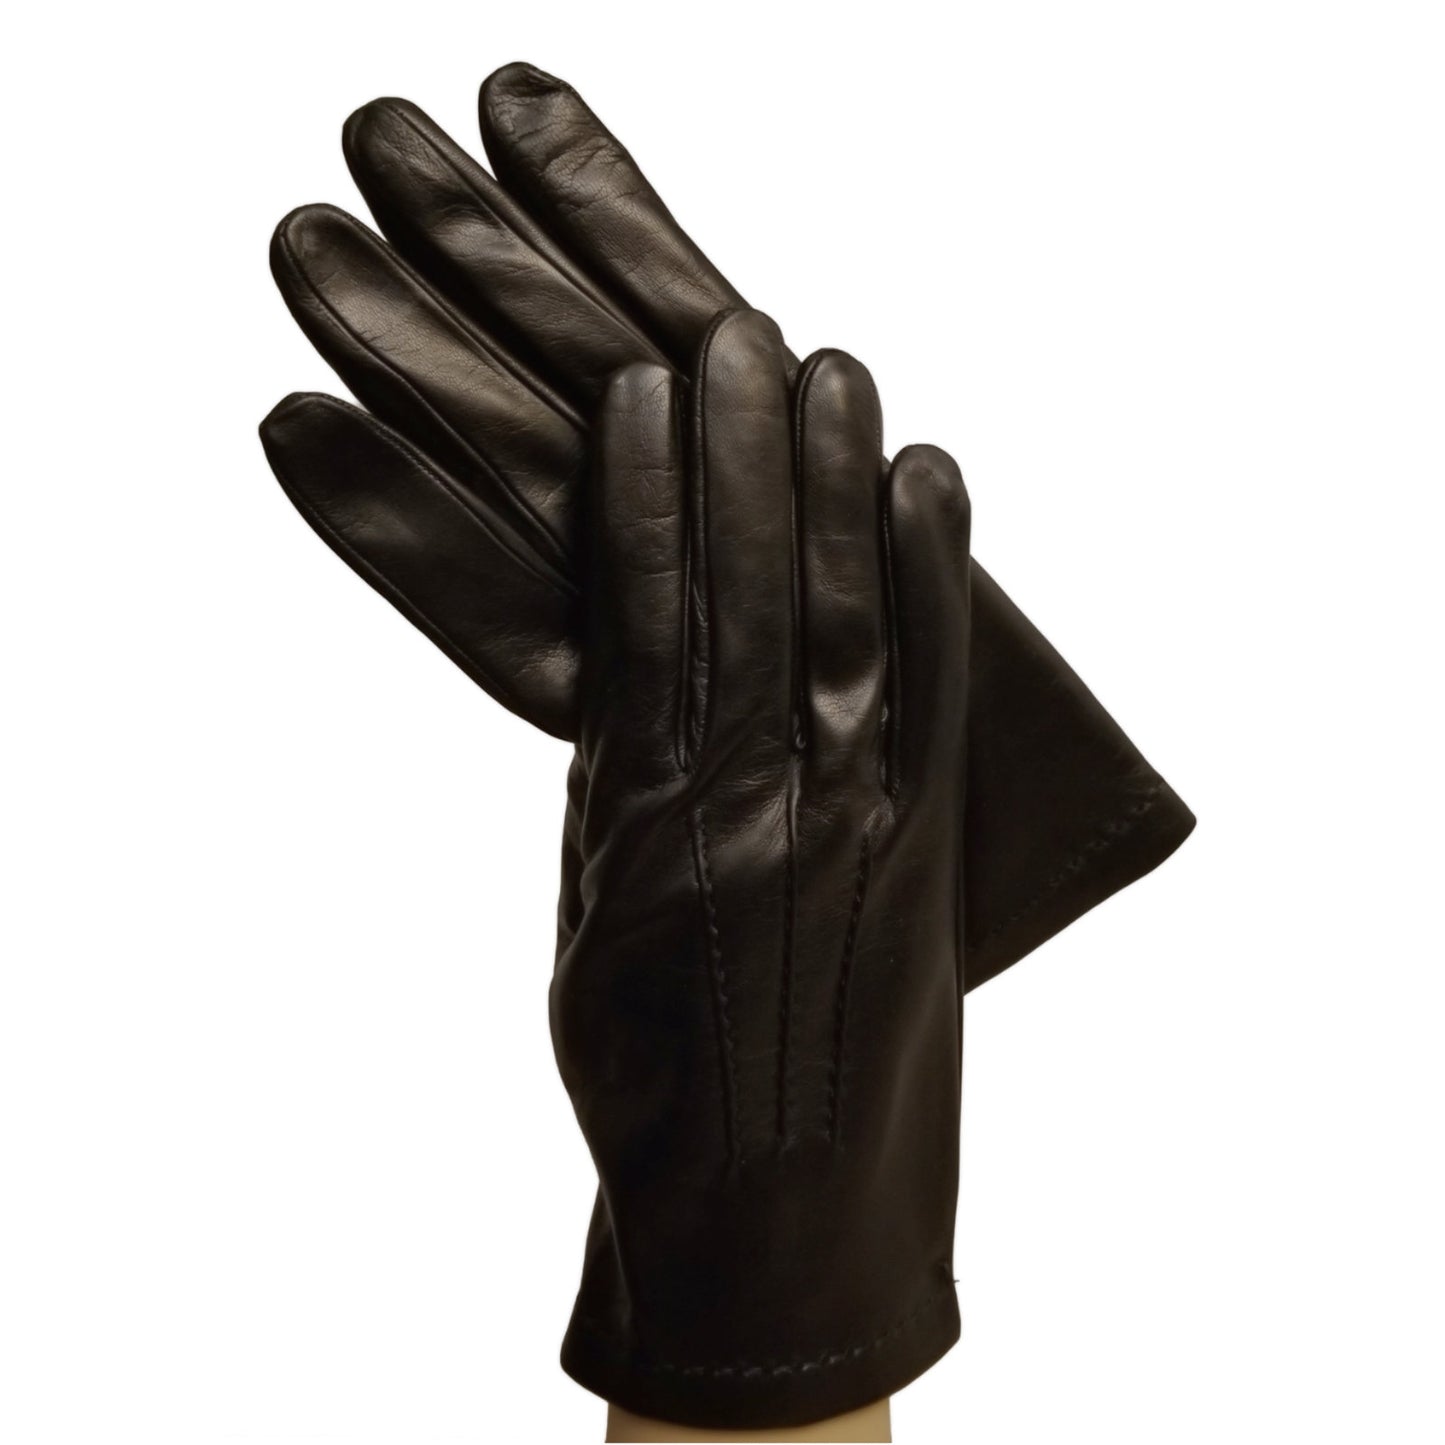 Black Men's Leather Gloves Lined in Cashmere.